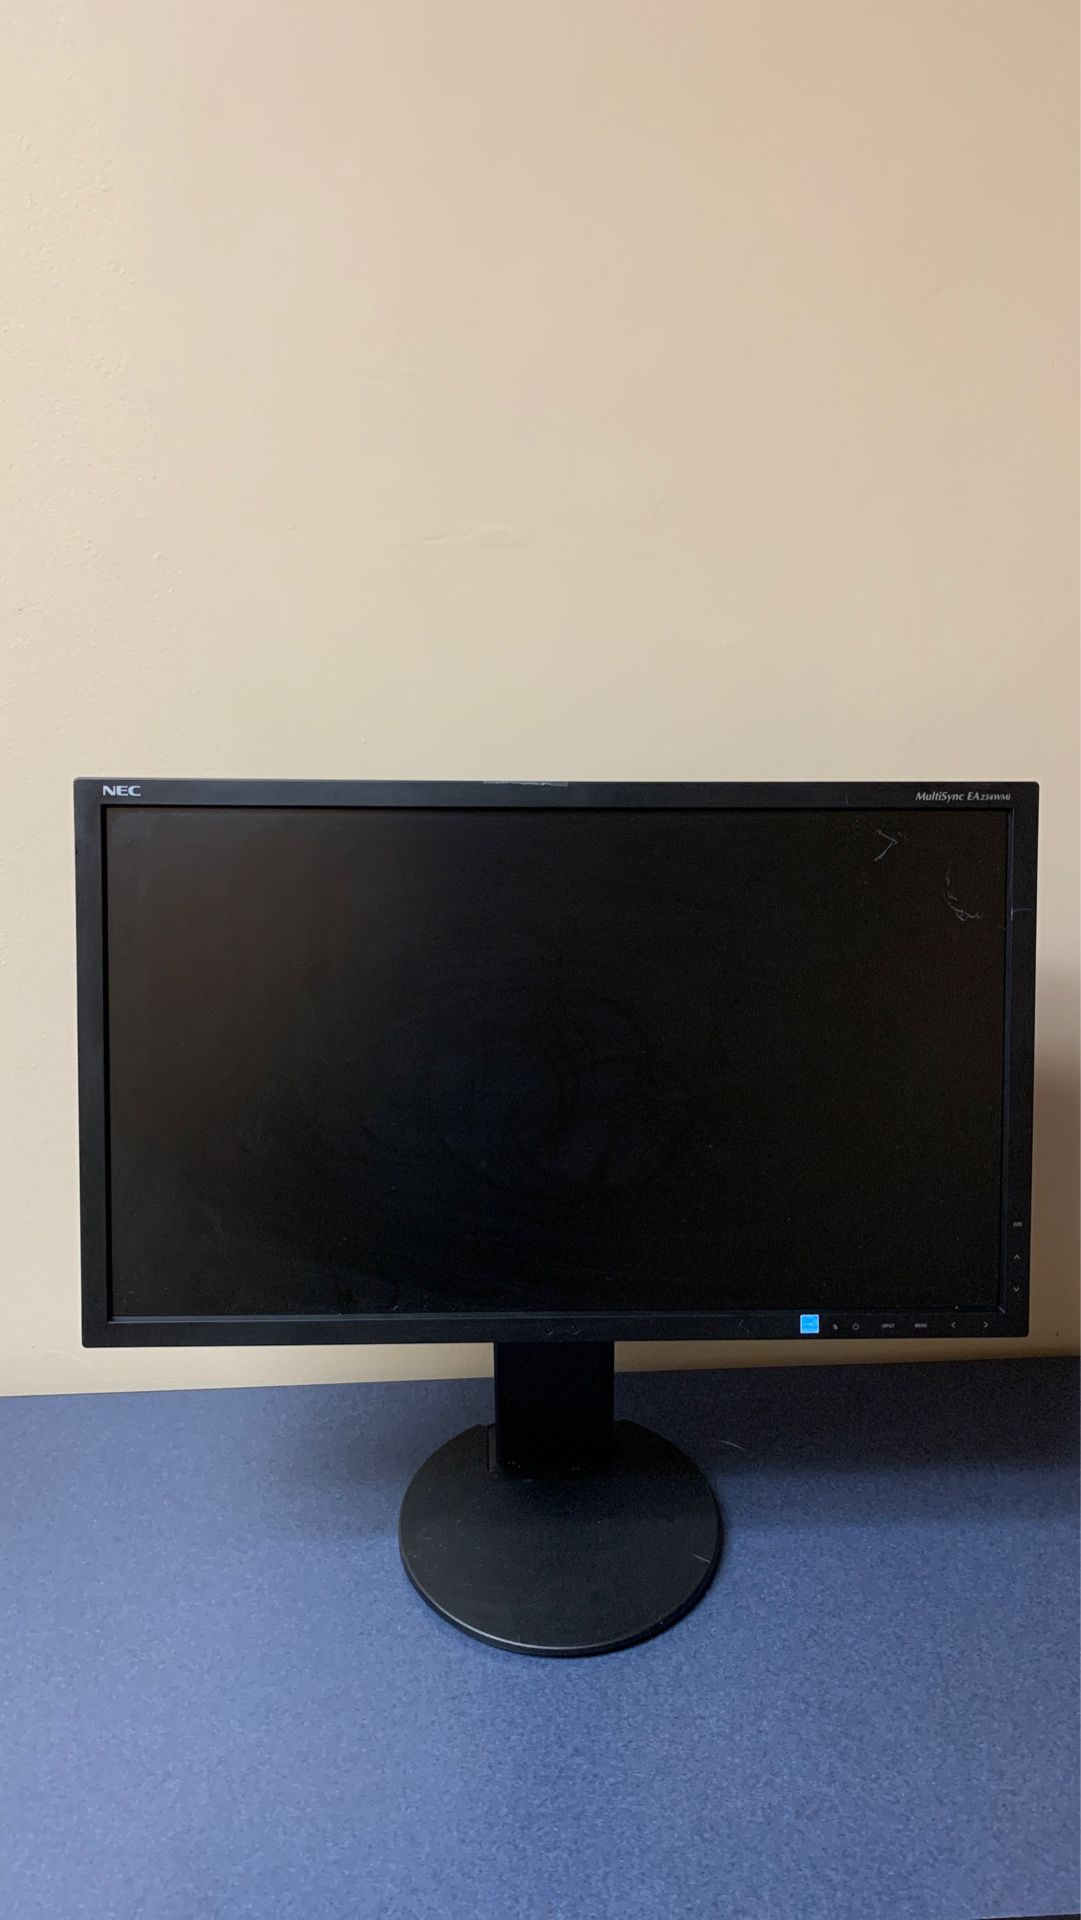 Monitor(Great for work)